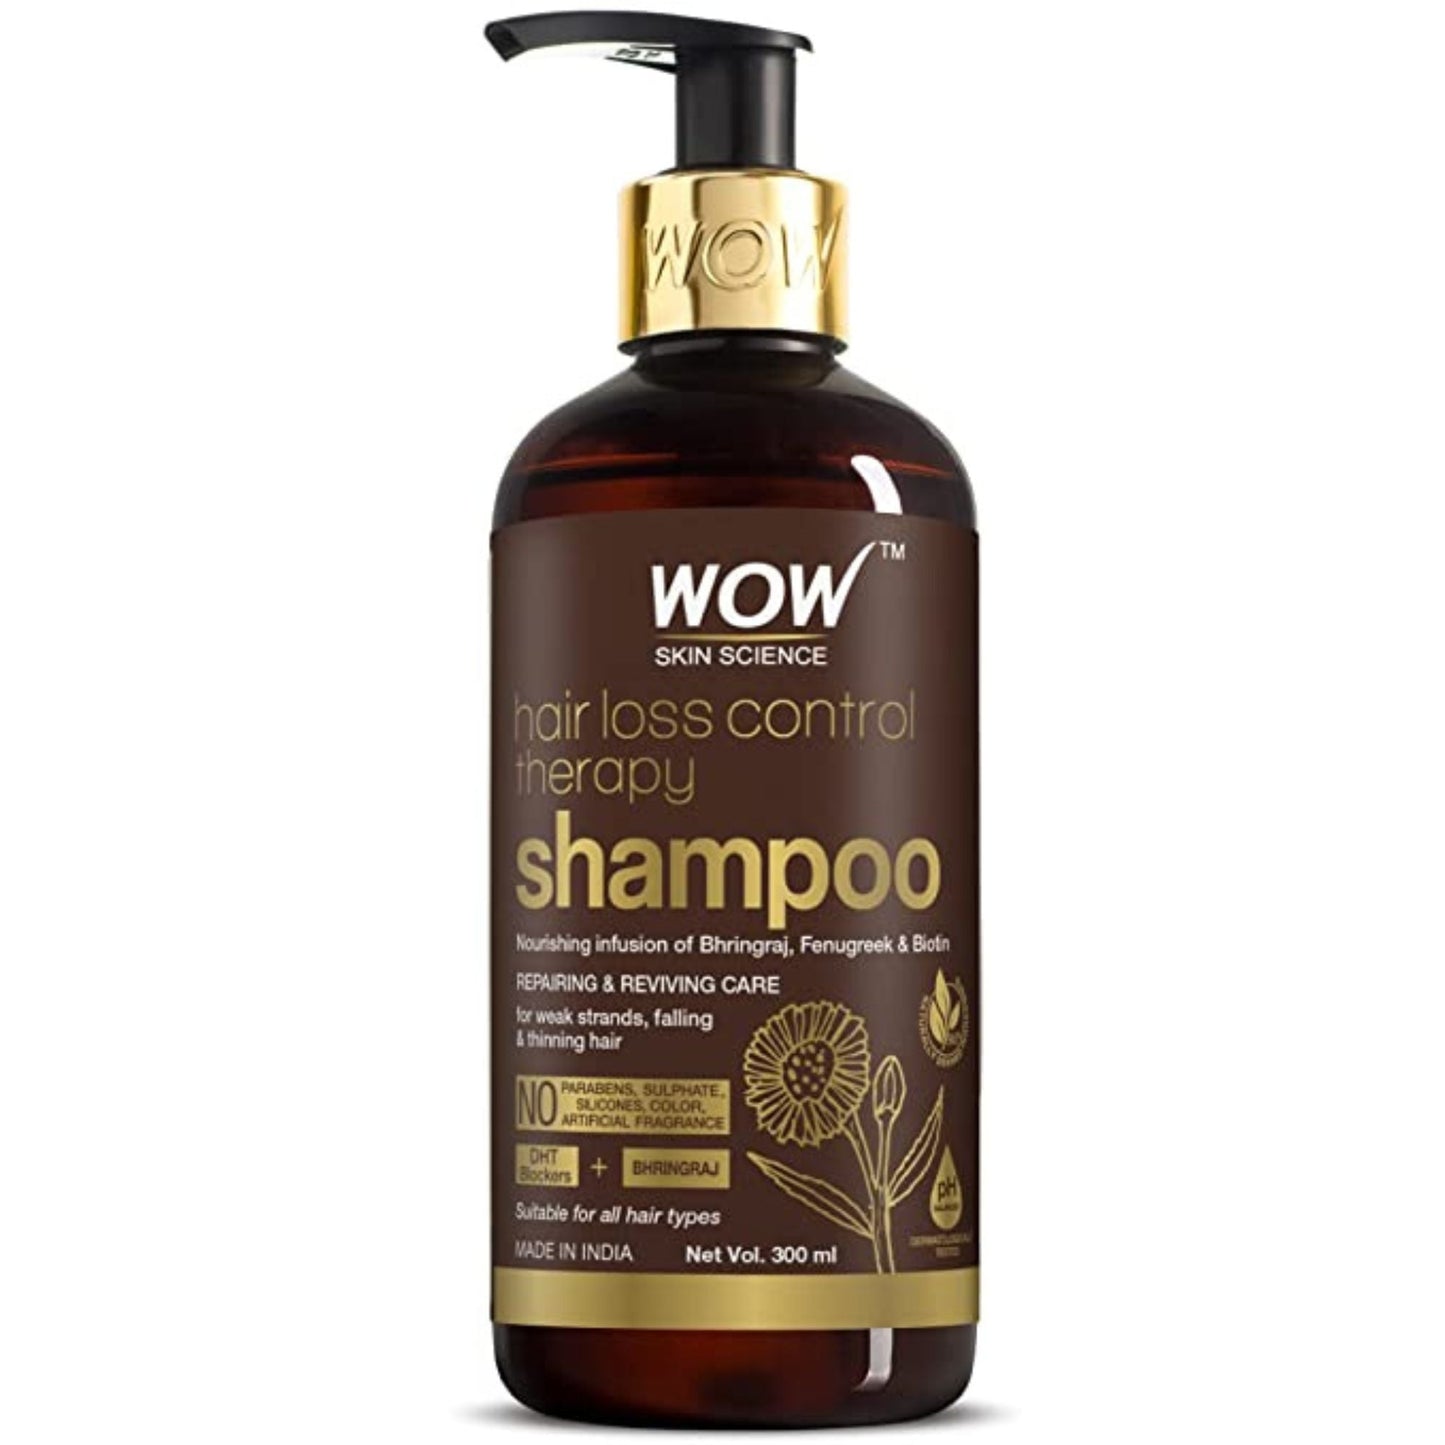 WOW Skin Science Hair fall control shampoo - Reduces Hair Loss - Contains Ayurvedic & Western Herbal Extracts with Natural Dht Blockers